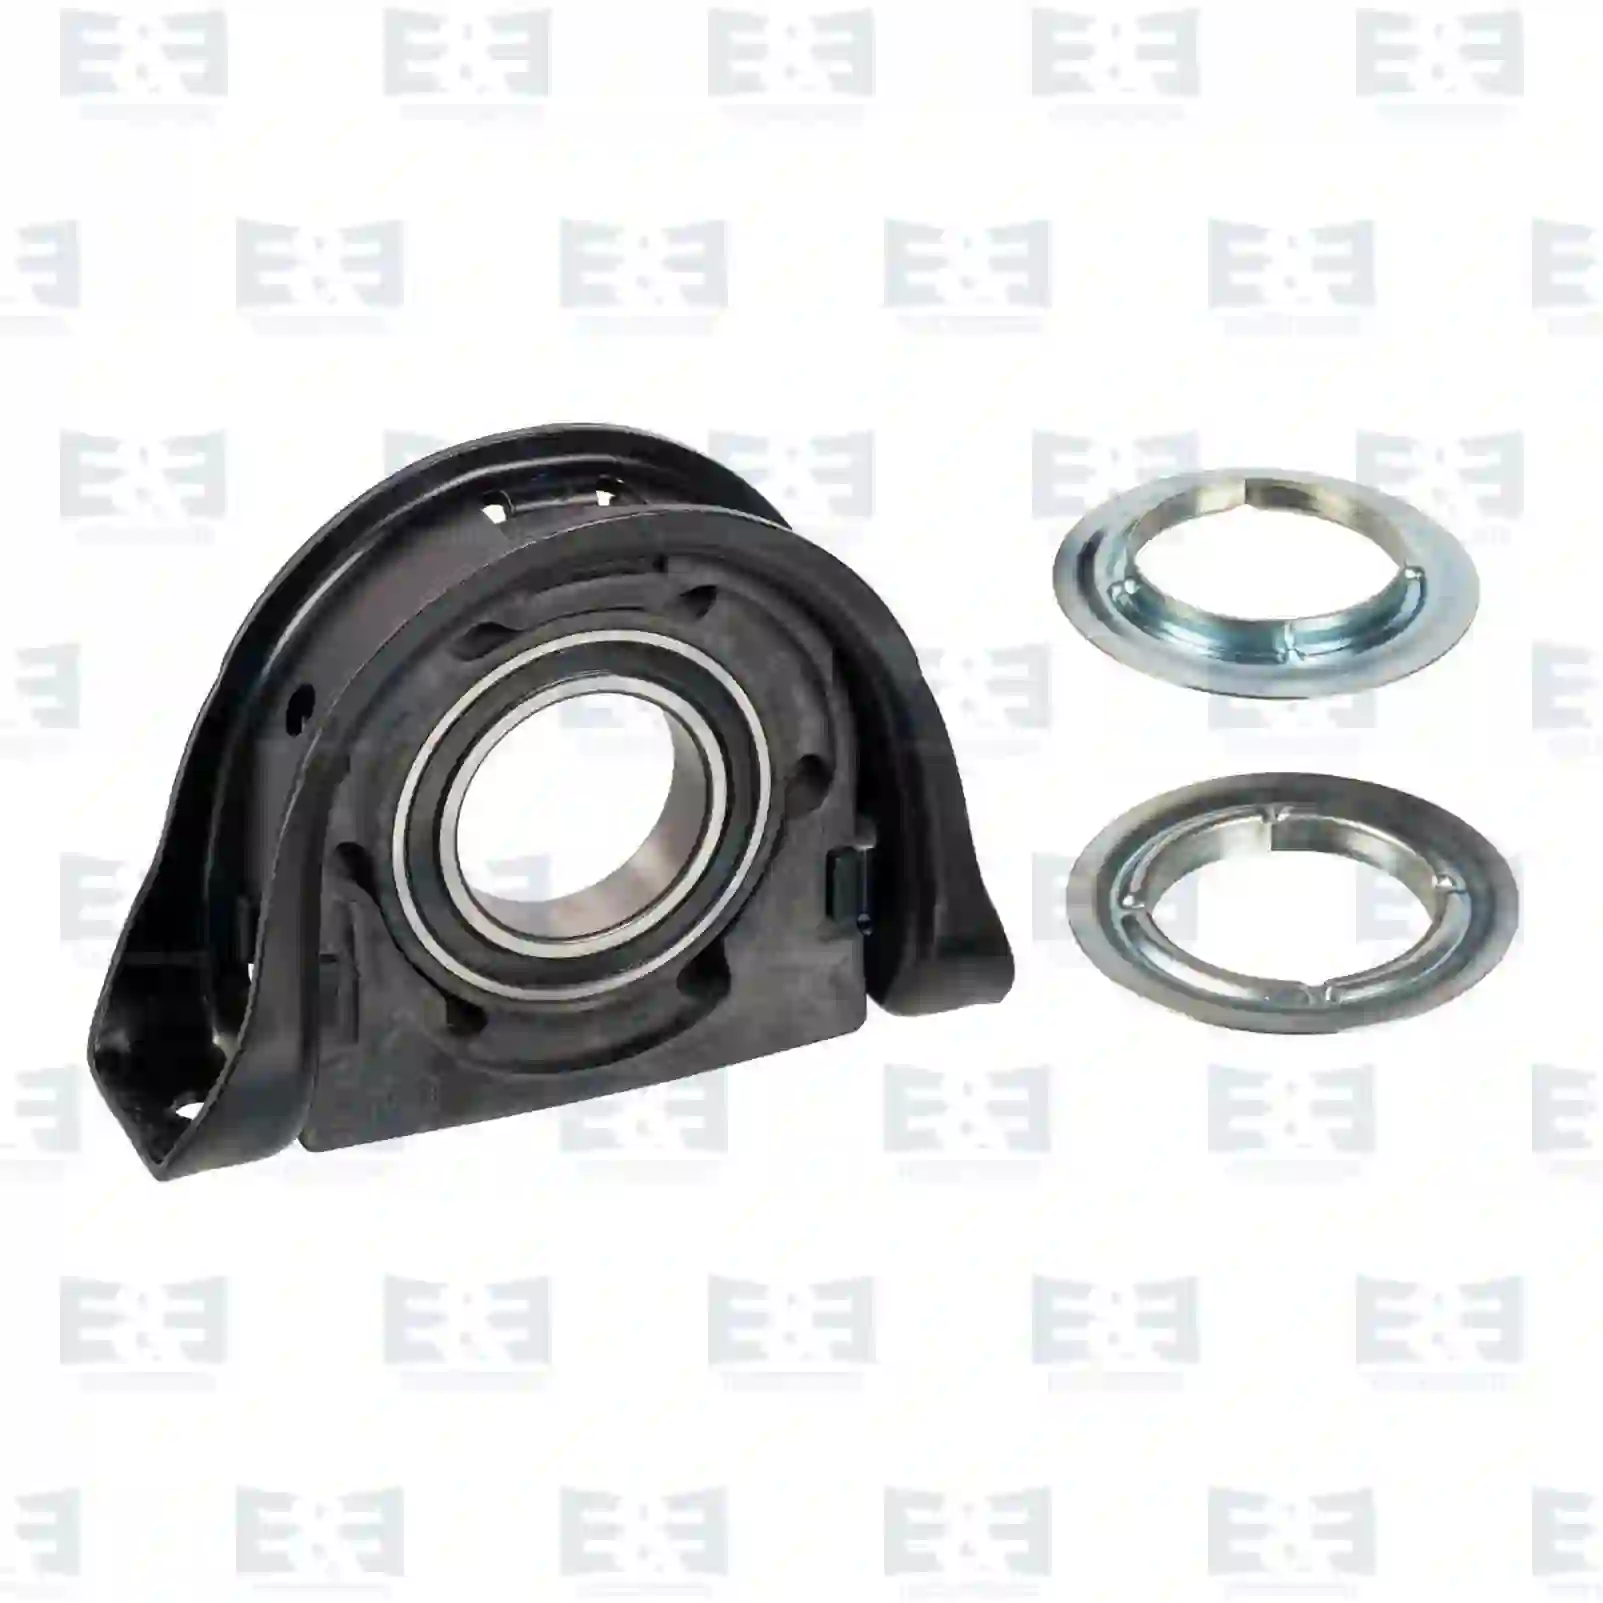 Support Bearing Center bearing, EE No 2E2276892 ,  oem no:7420875962, 20875962, ZG02478-0008 E&E Truck Spare Parts | Truck Spare Parts, Auotomotive Spare Parts